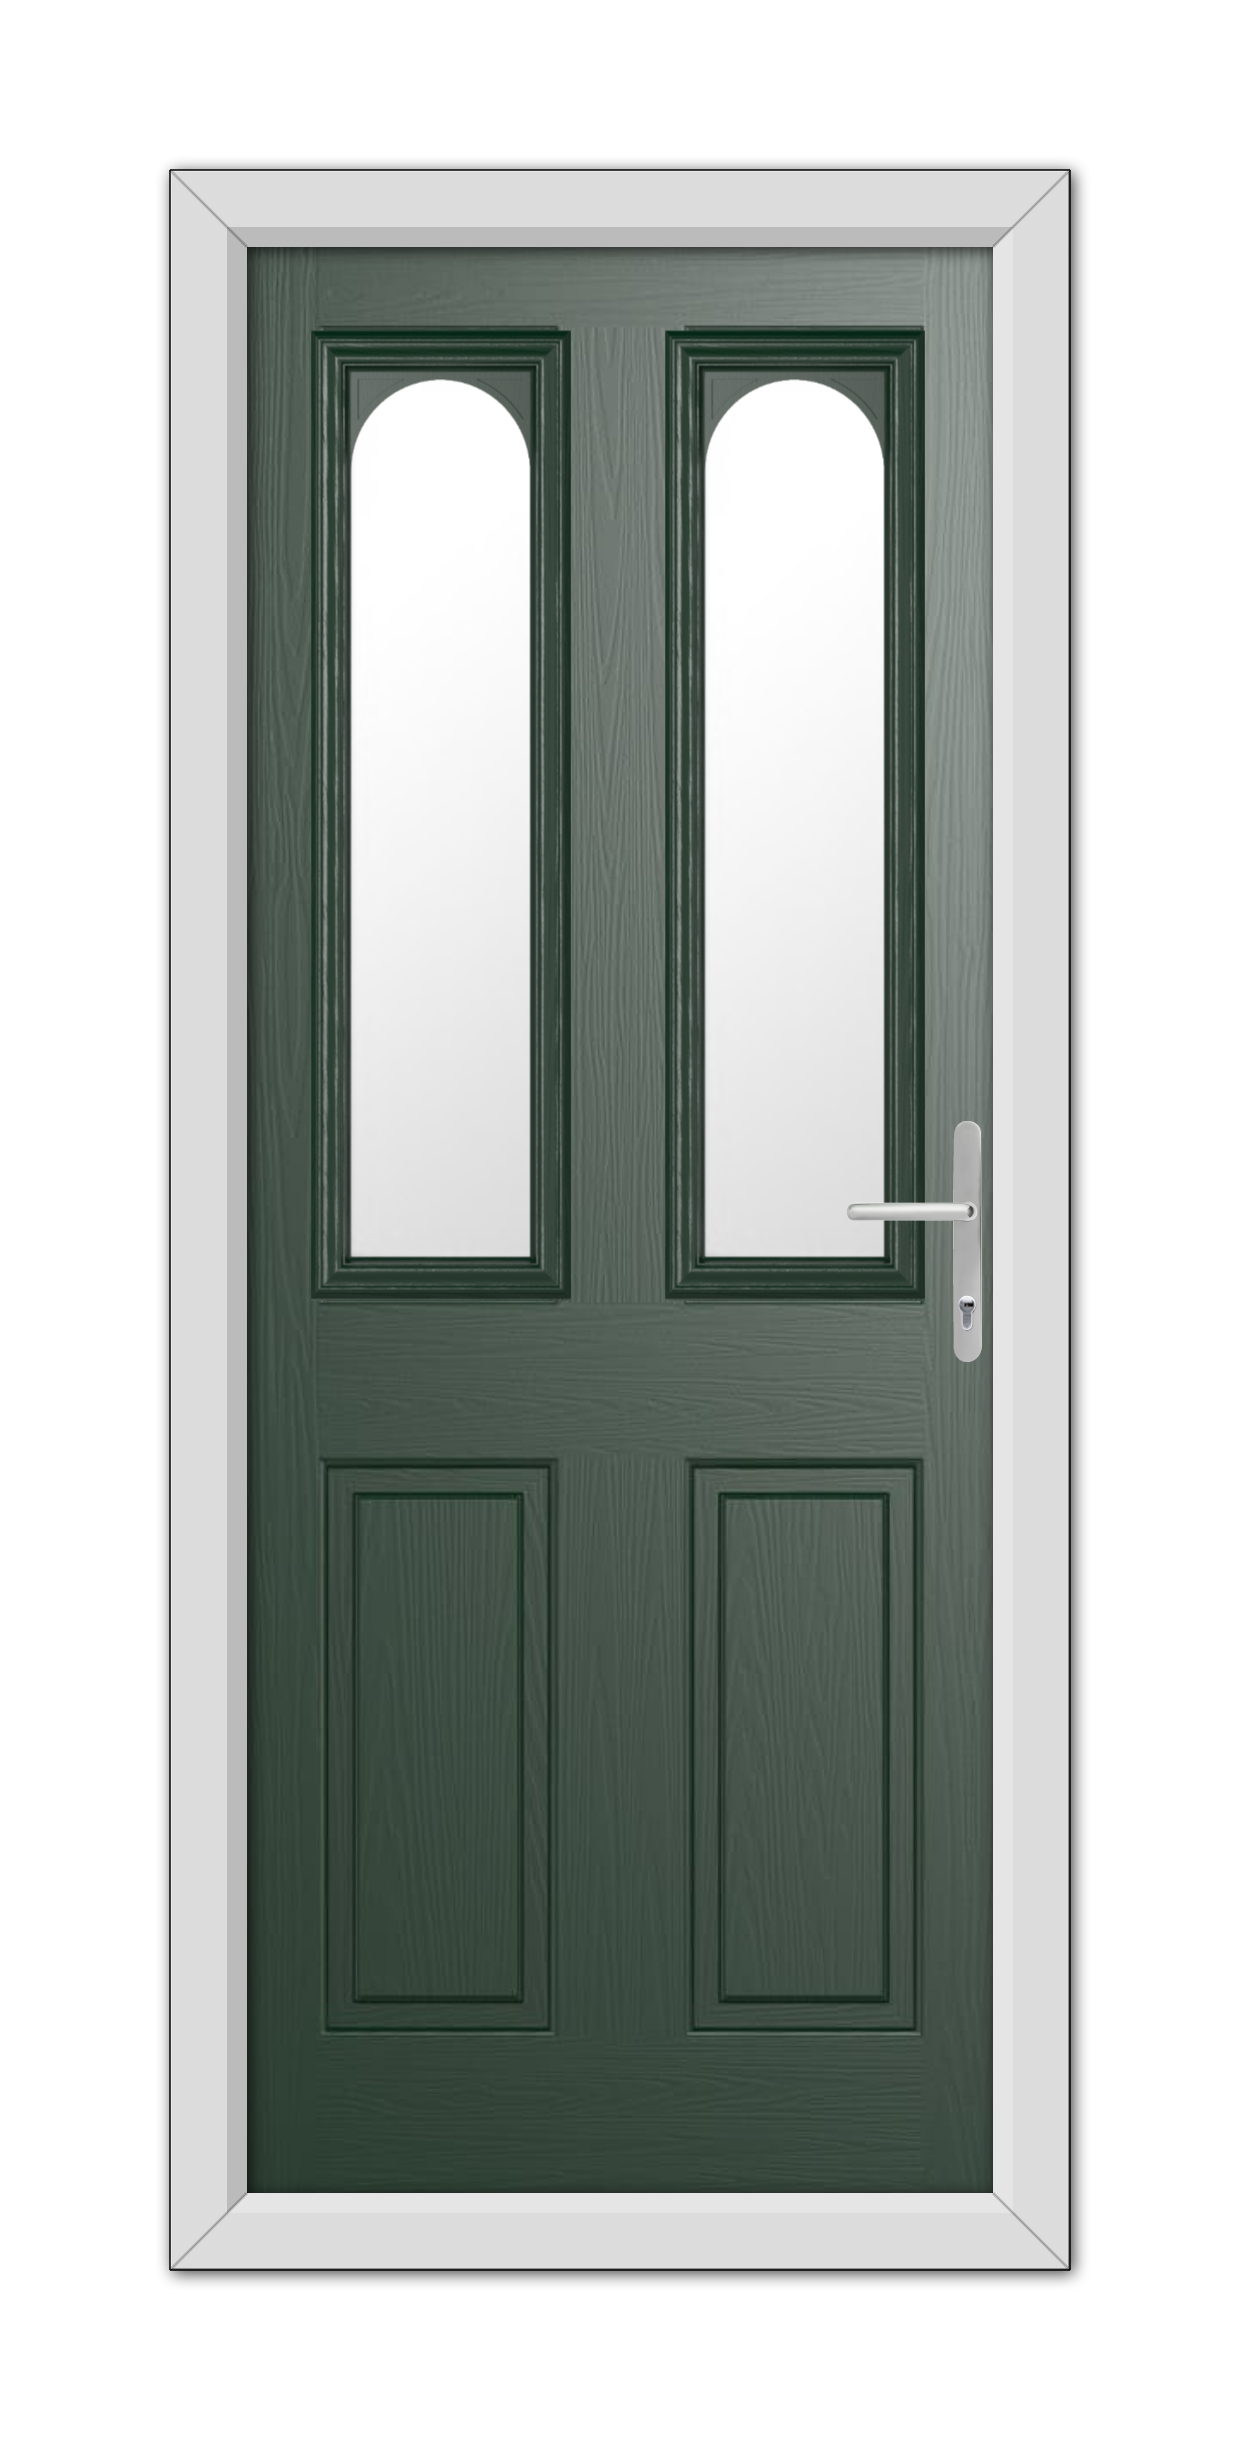 Double door with a Green Elmhurst Composite Door 48mm Timber Core finish and two vertical glass panels in each door, featuring a white frame and a modern handle on the right.